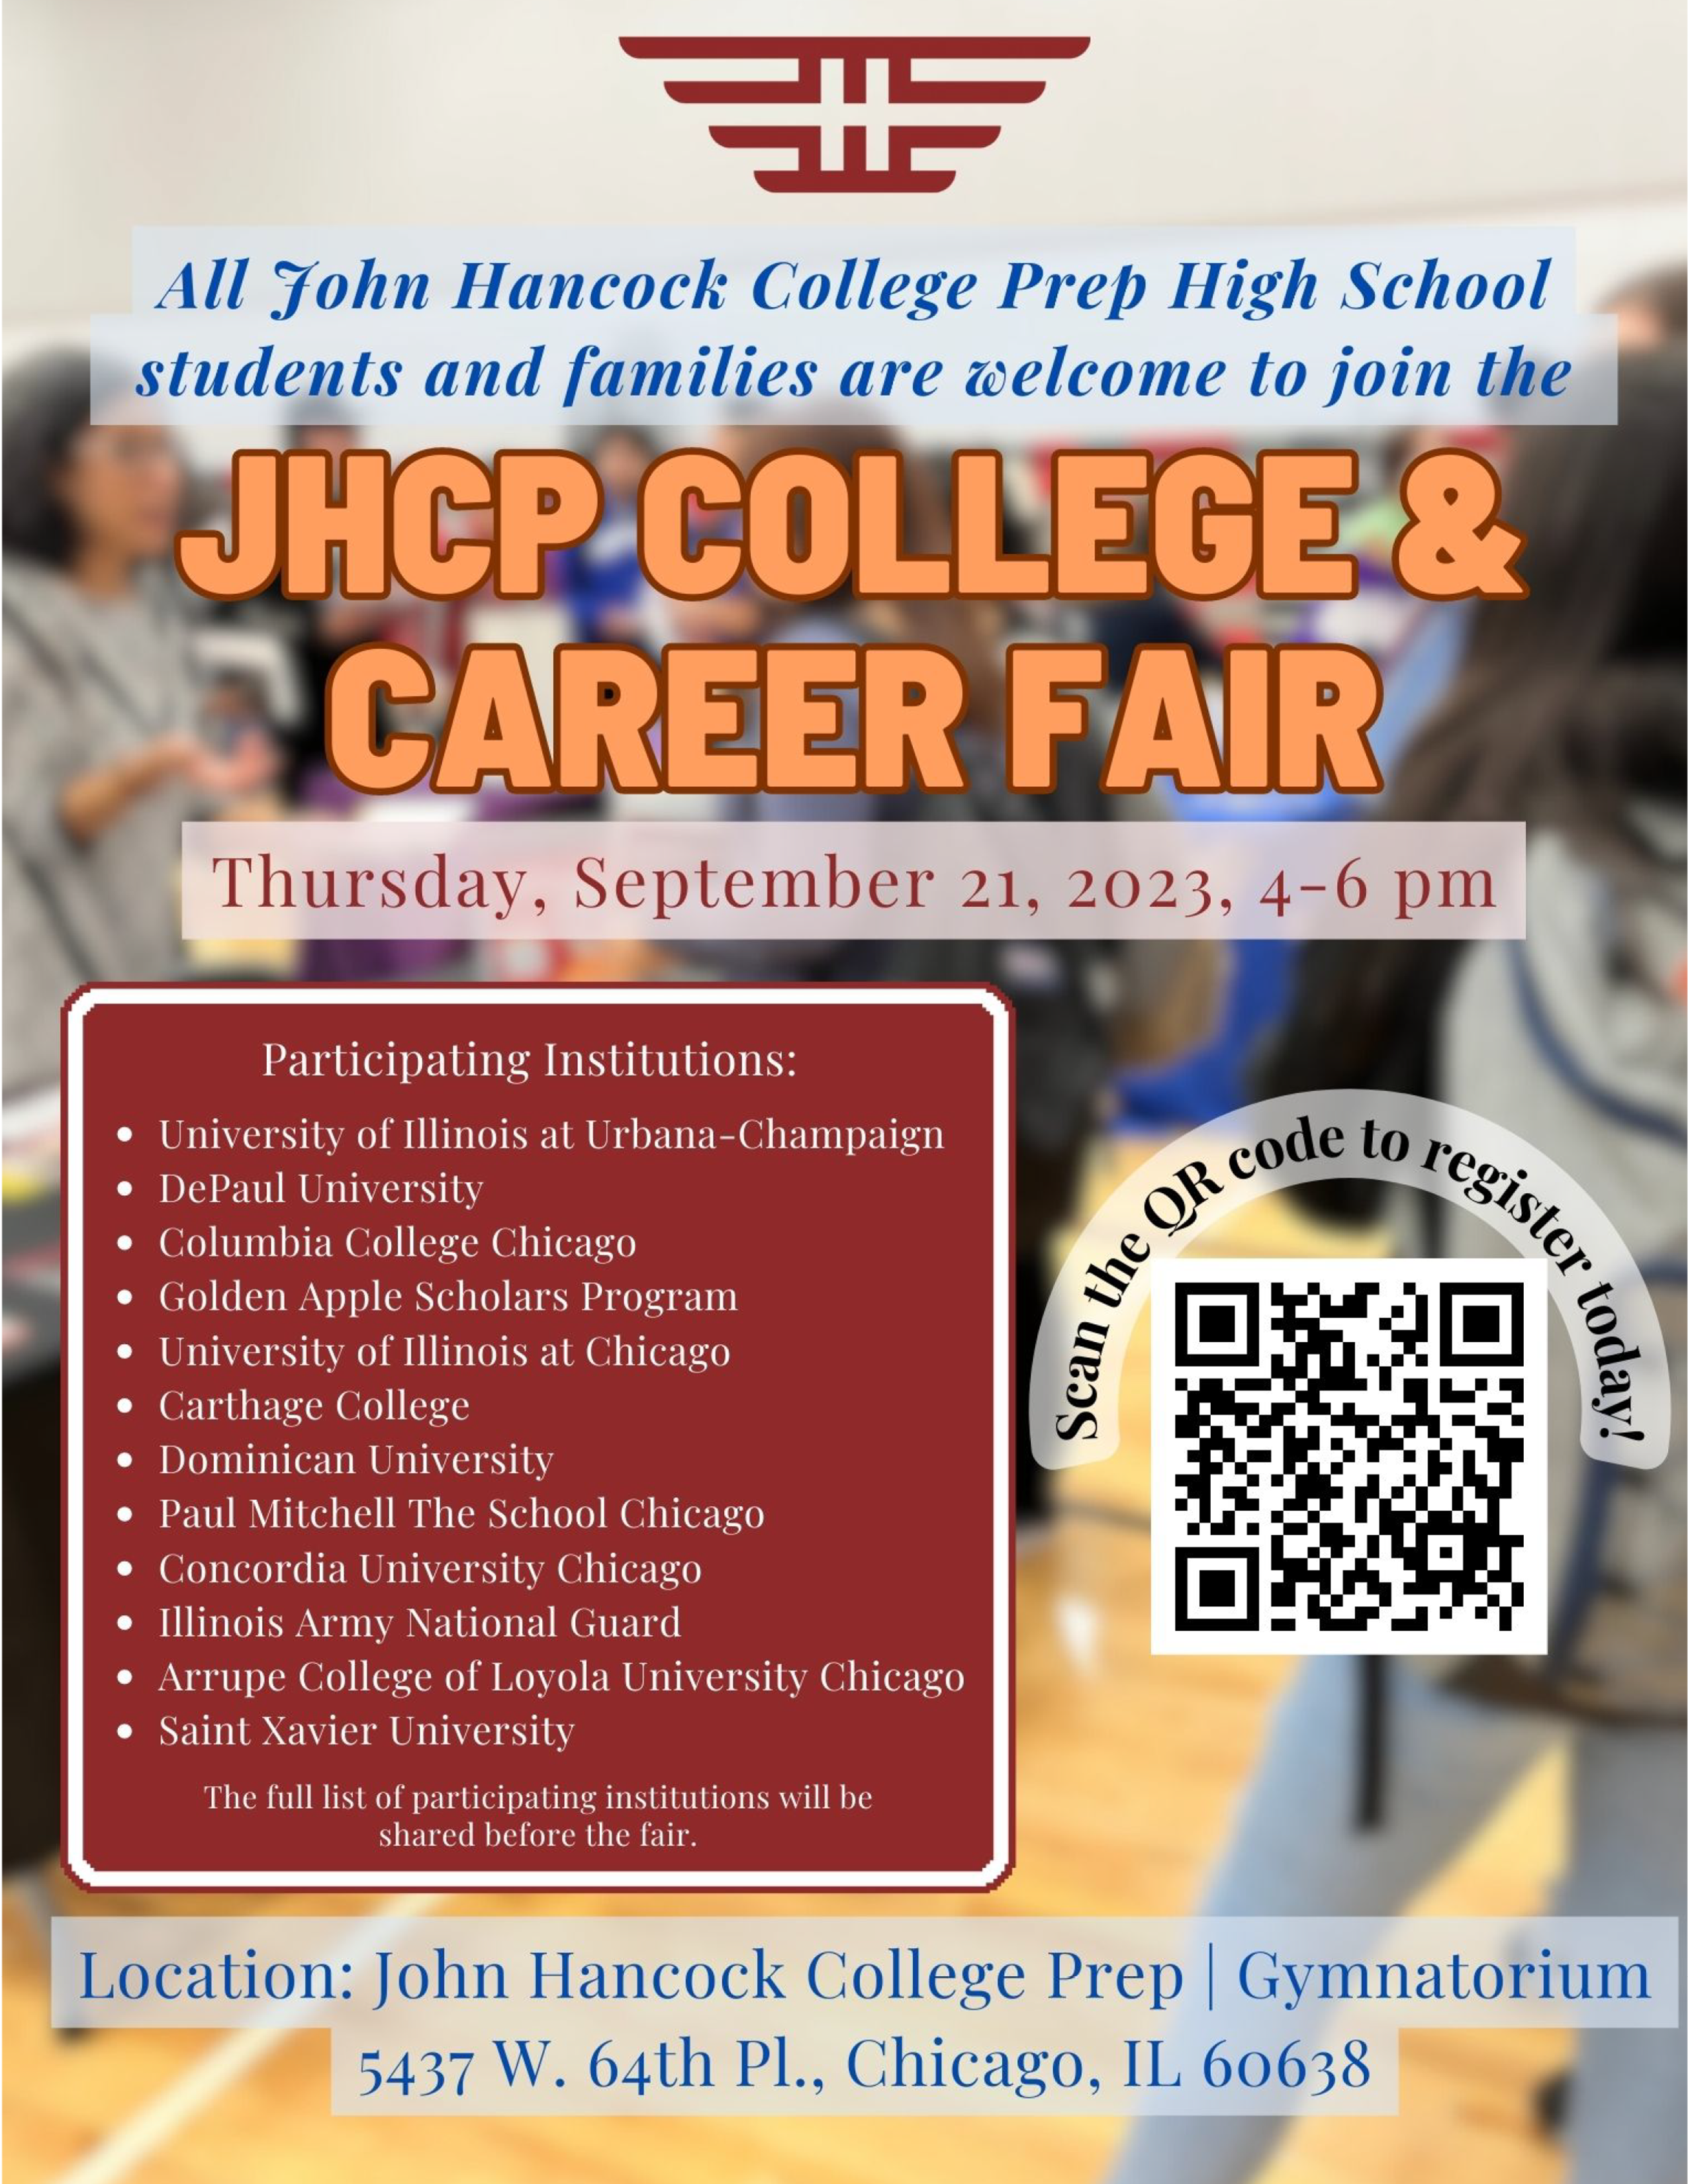 John Hancock College Prep will host a College and Career Fair on September 21, 2023 from 4 to 6 pm.